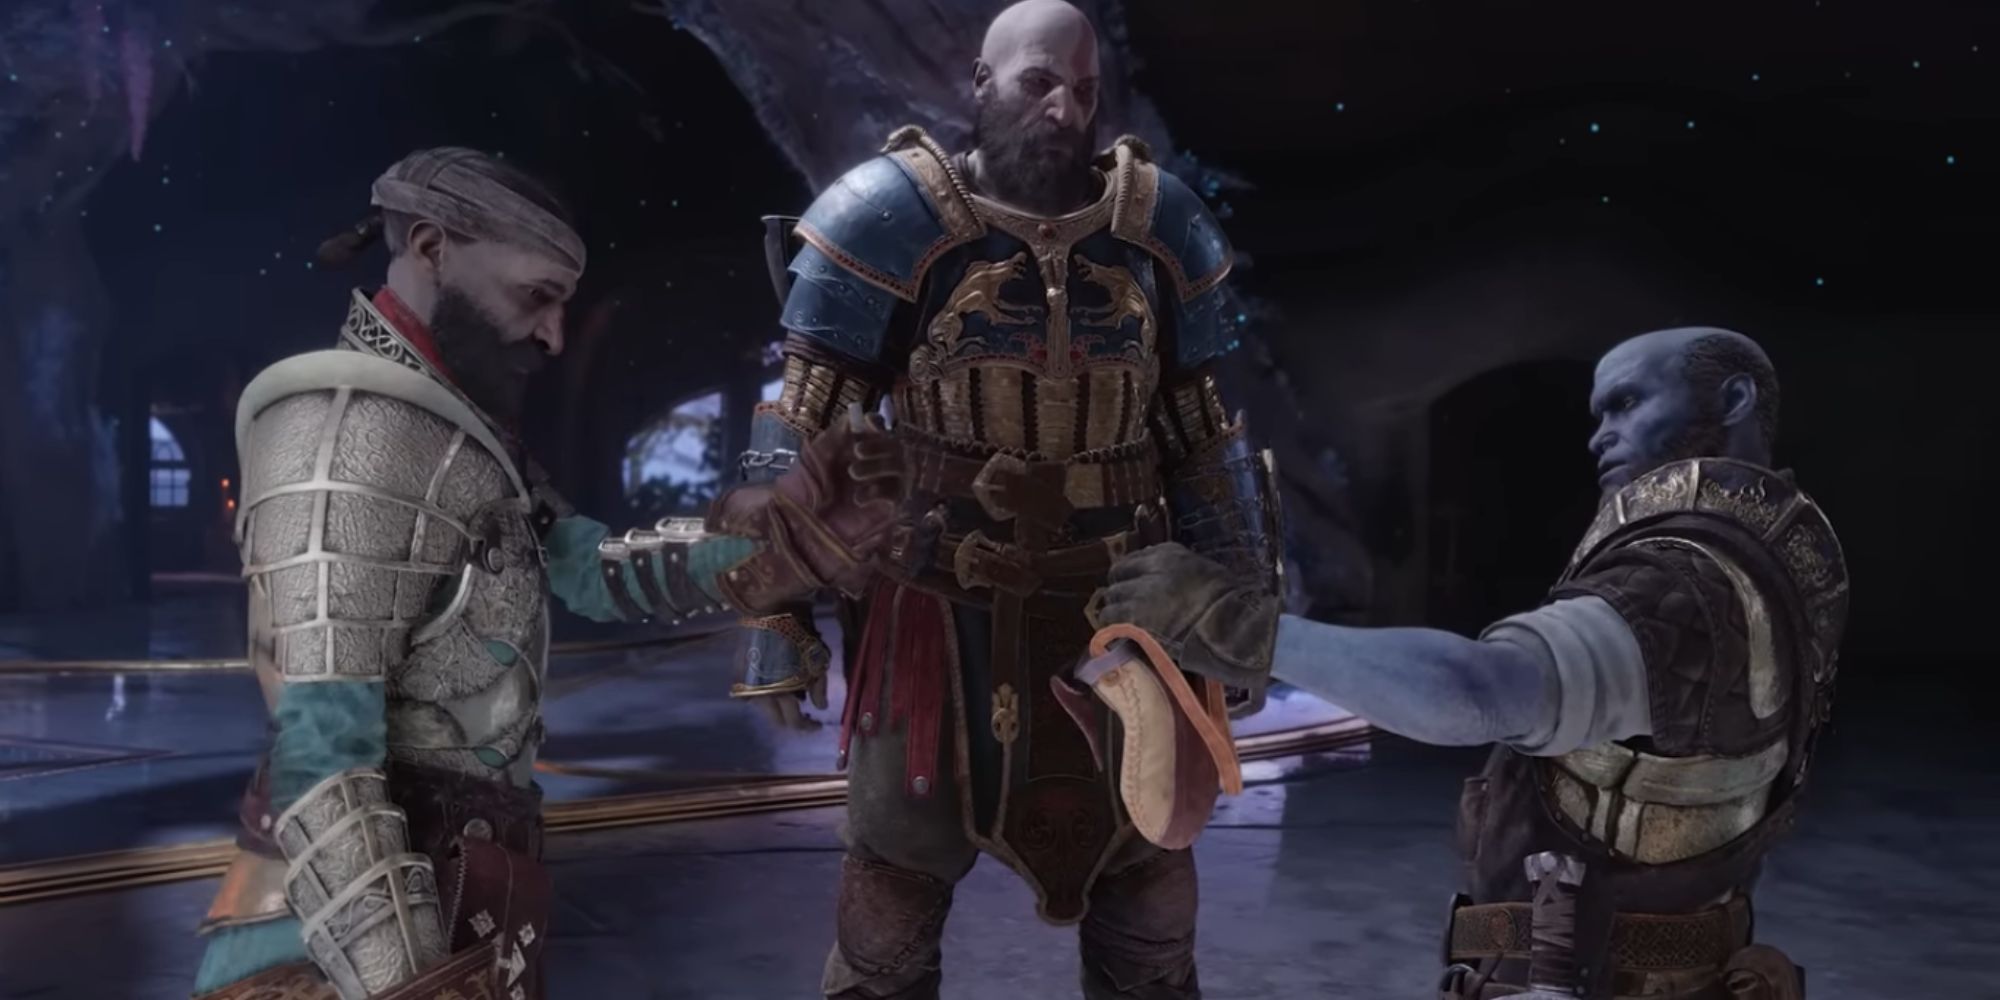 Brok and Sindri talk in front of Kratos inside the house.